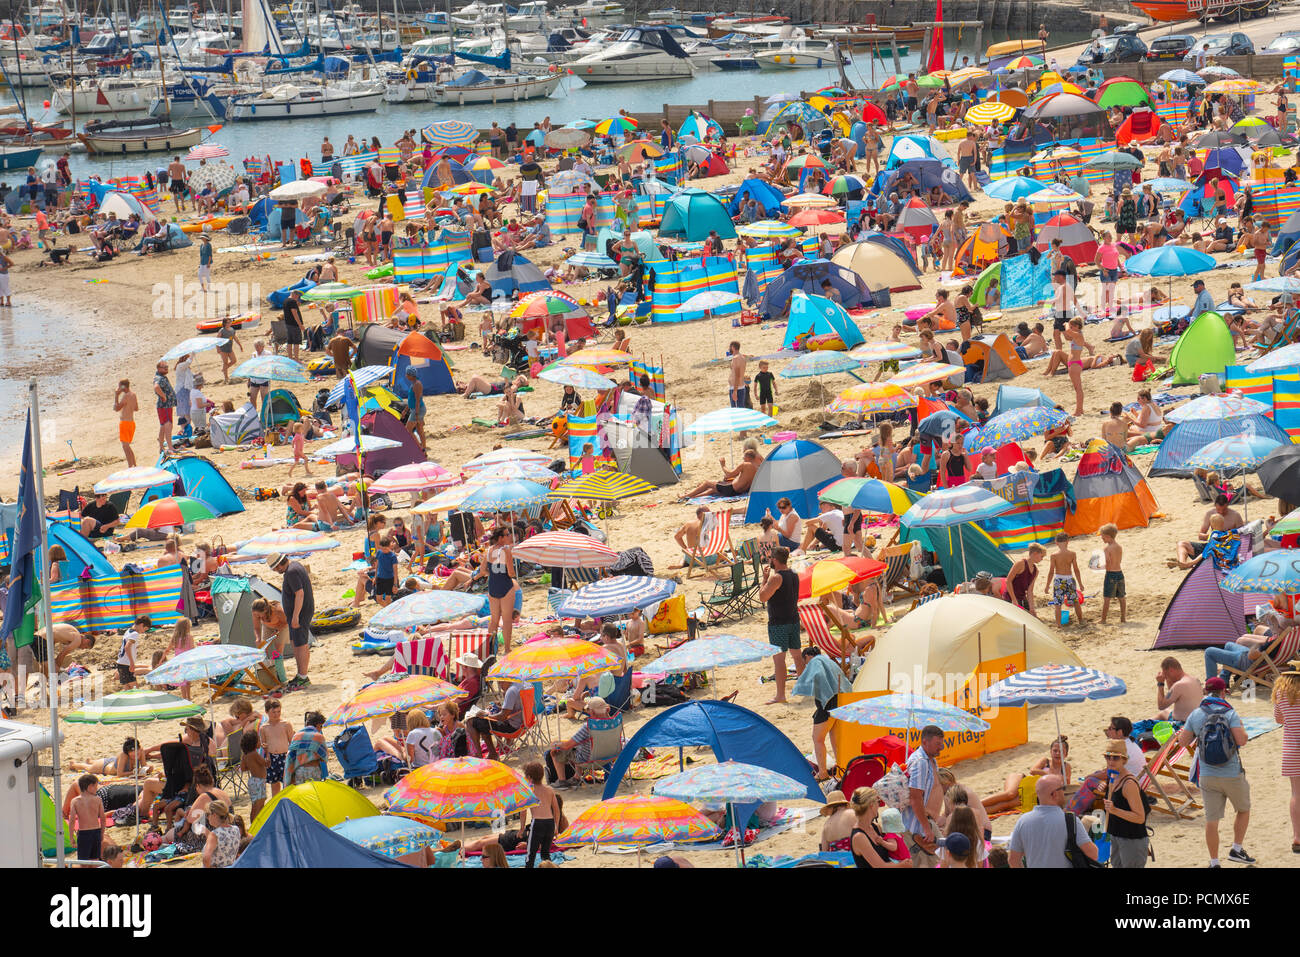 Lyme Regis, Dorset, UK. 3rd August 2018.  UK Weather: Scorching hot sunshine and blue sky in Lyme Regis.  Holidaymakers and sunseekers flock to the packed beach at the seaside resort of Lyme Regis this afternoon as temperatures soar on what is set to be the hottest day on record. Credit: Celia McMahon/Alamy Live News Stock Photo